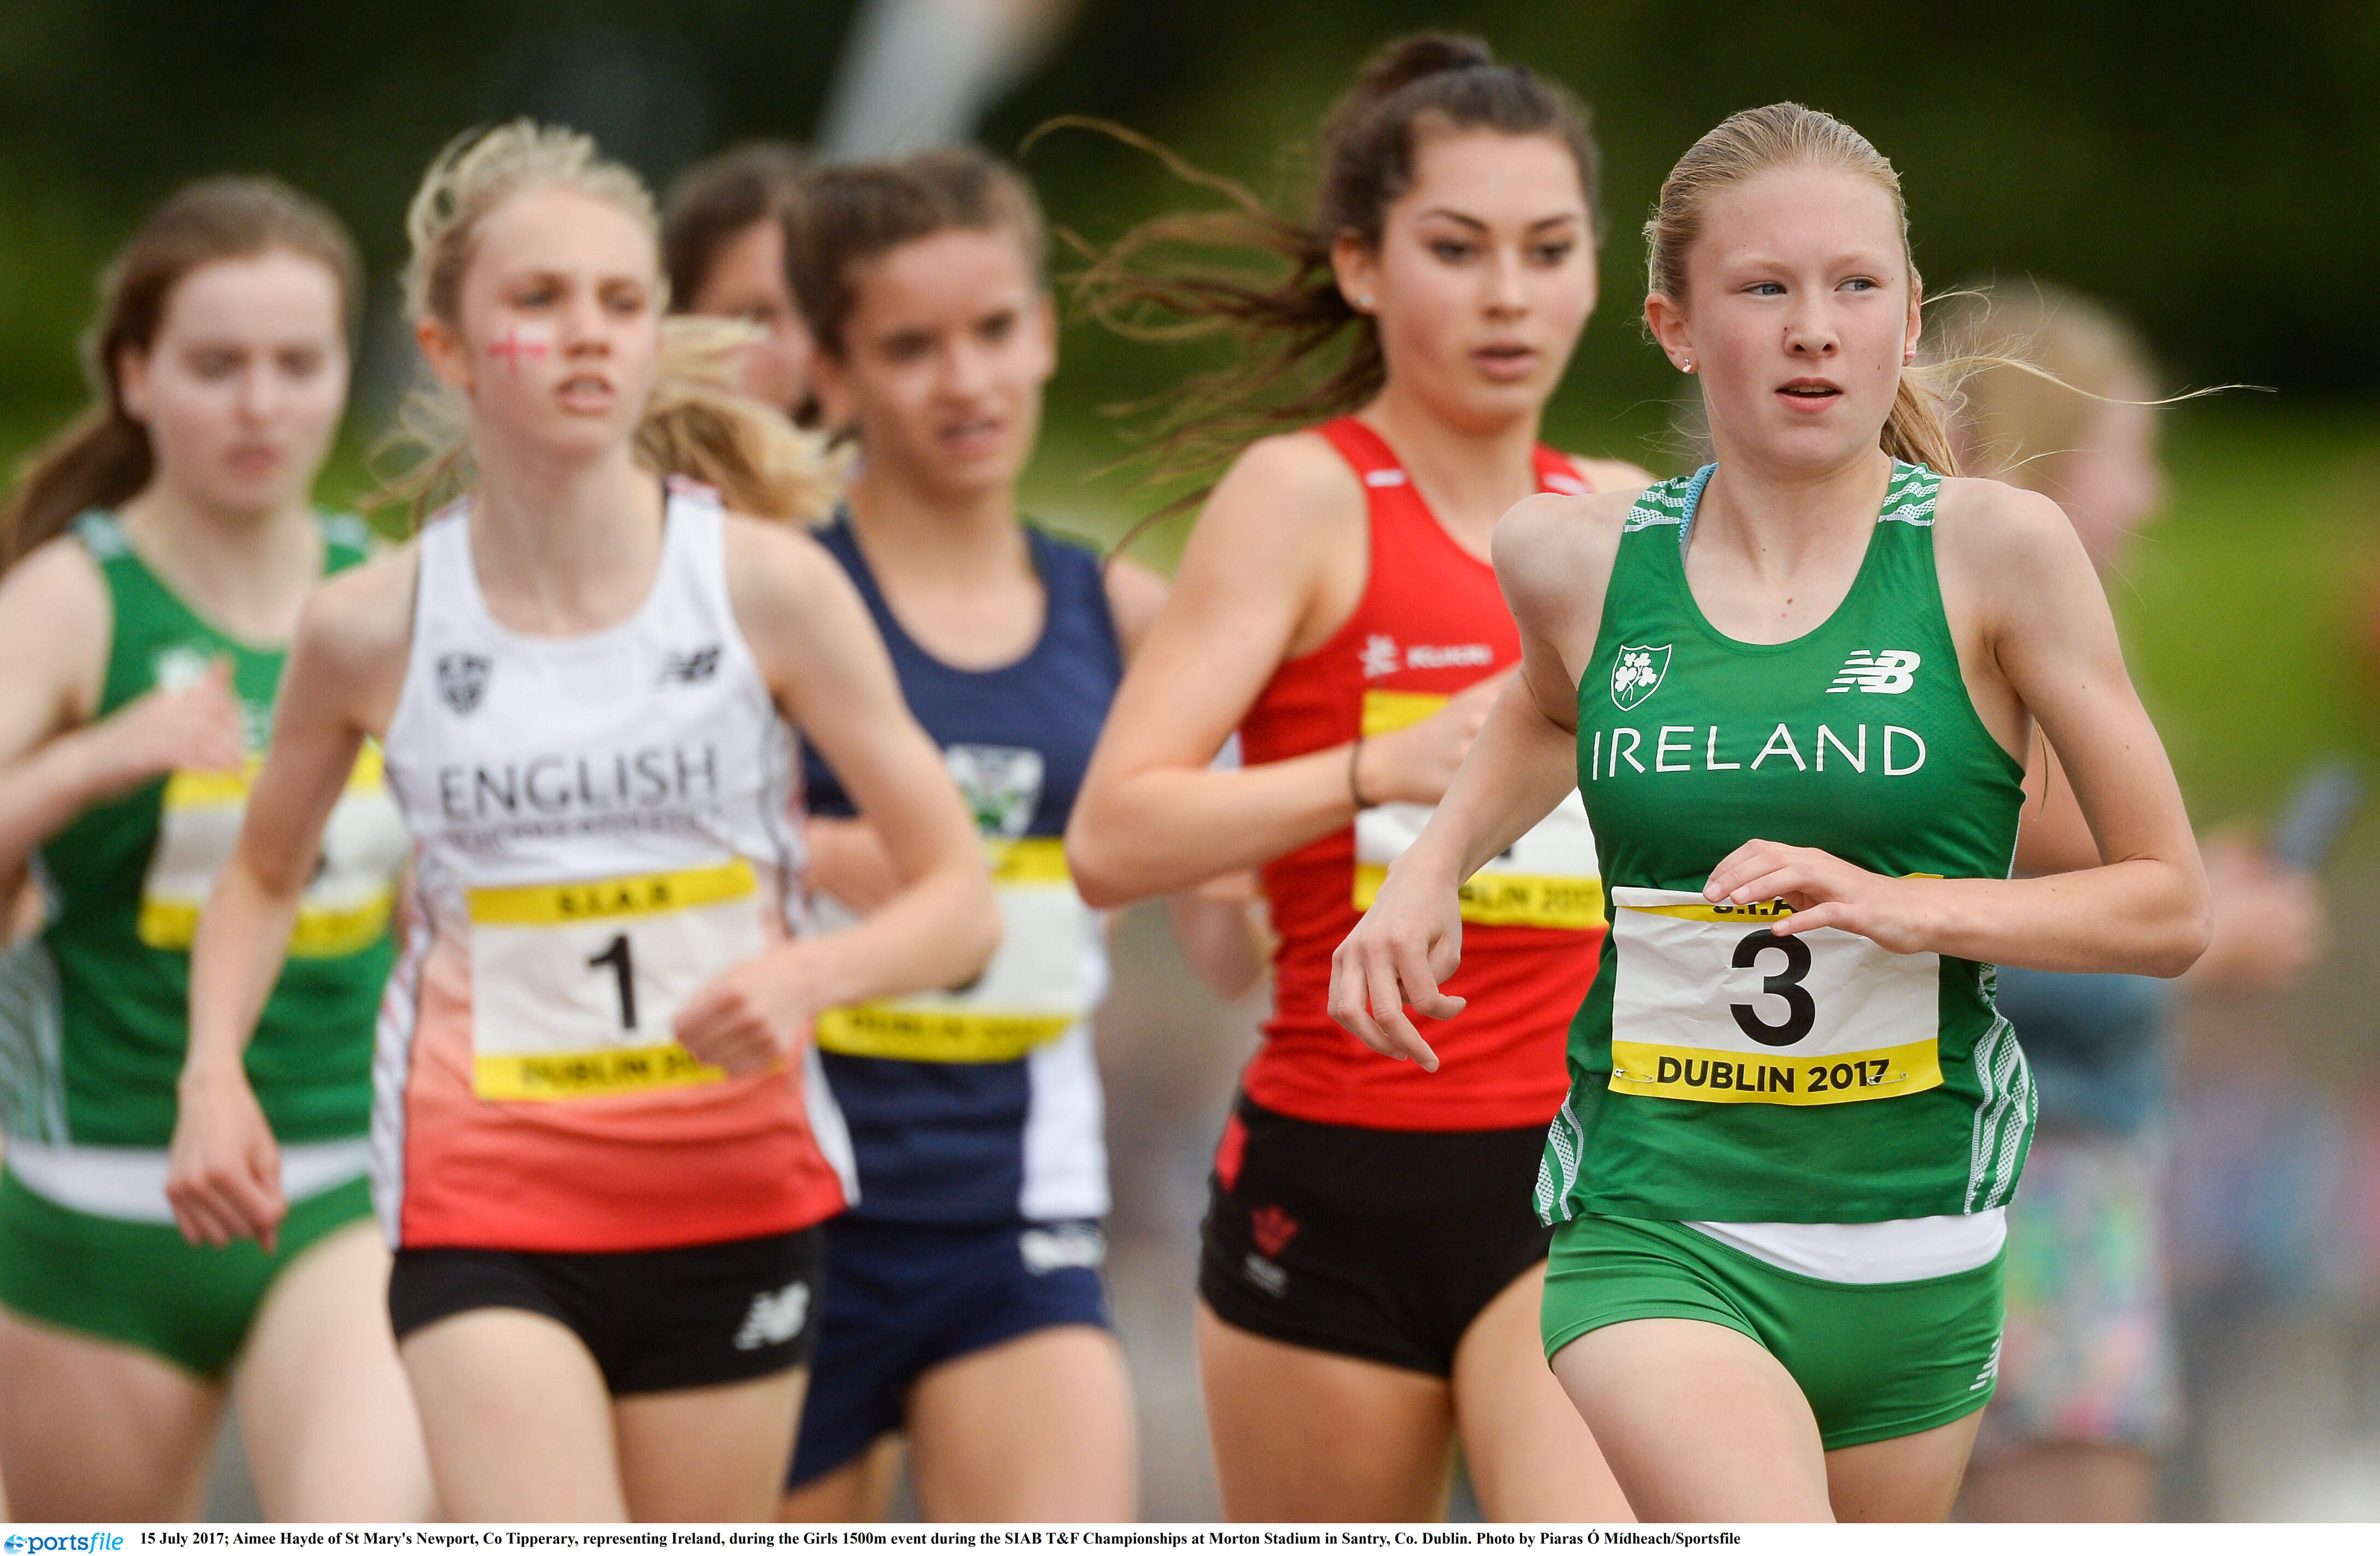 Irish Athletes Achieve Success at SIAB Schools International Cross Country Competition